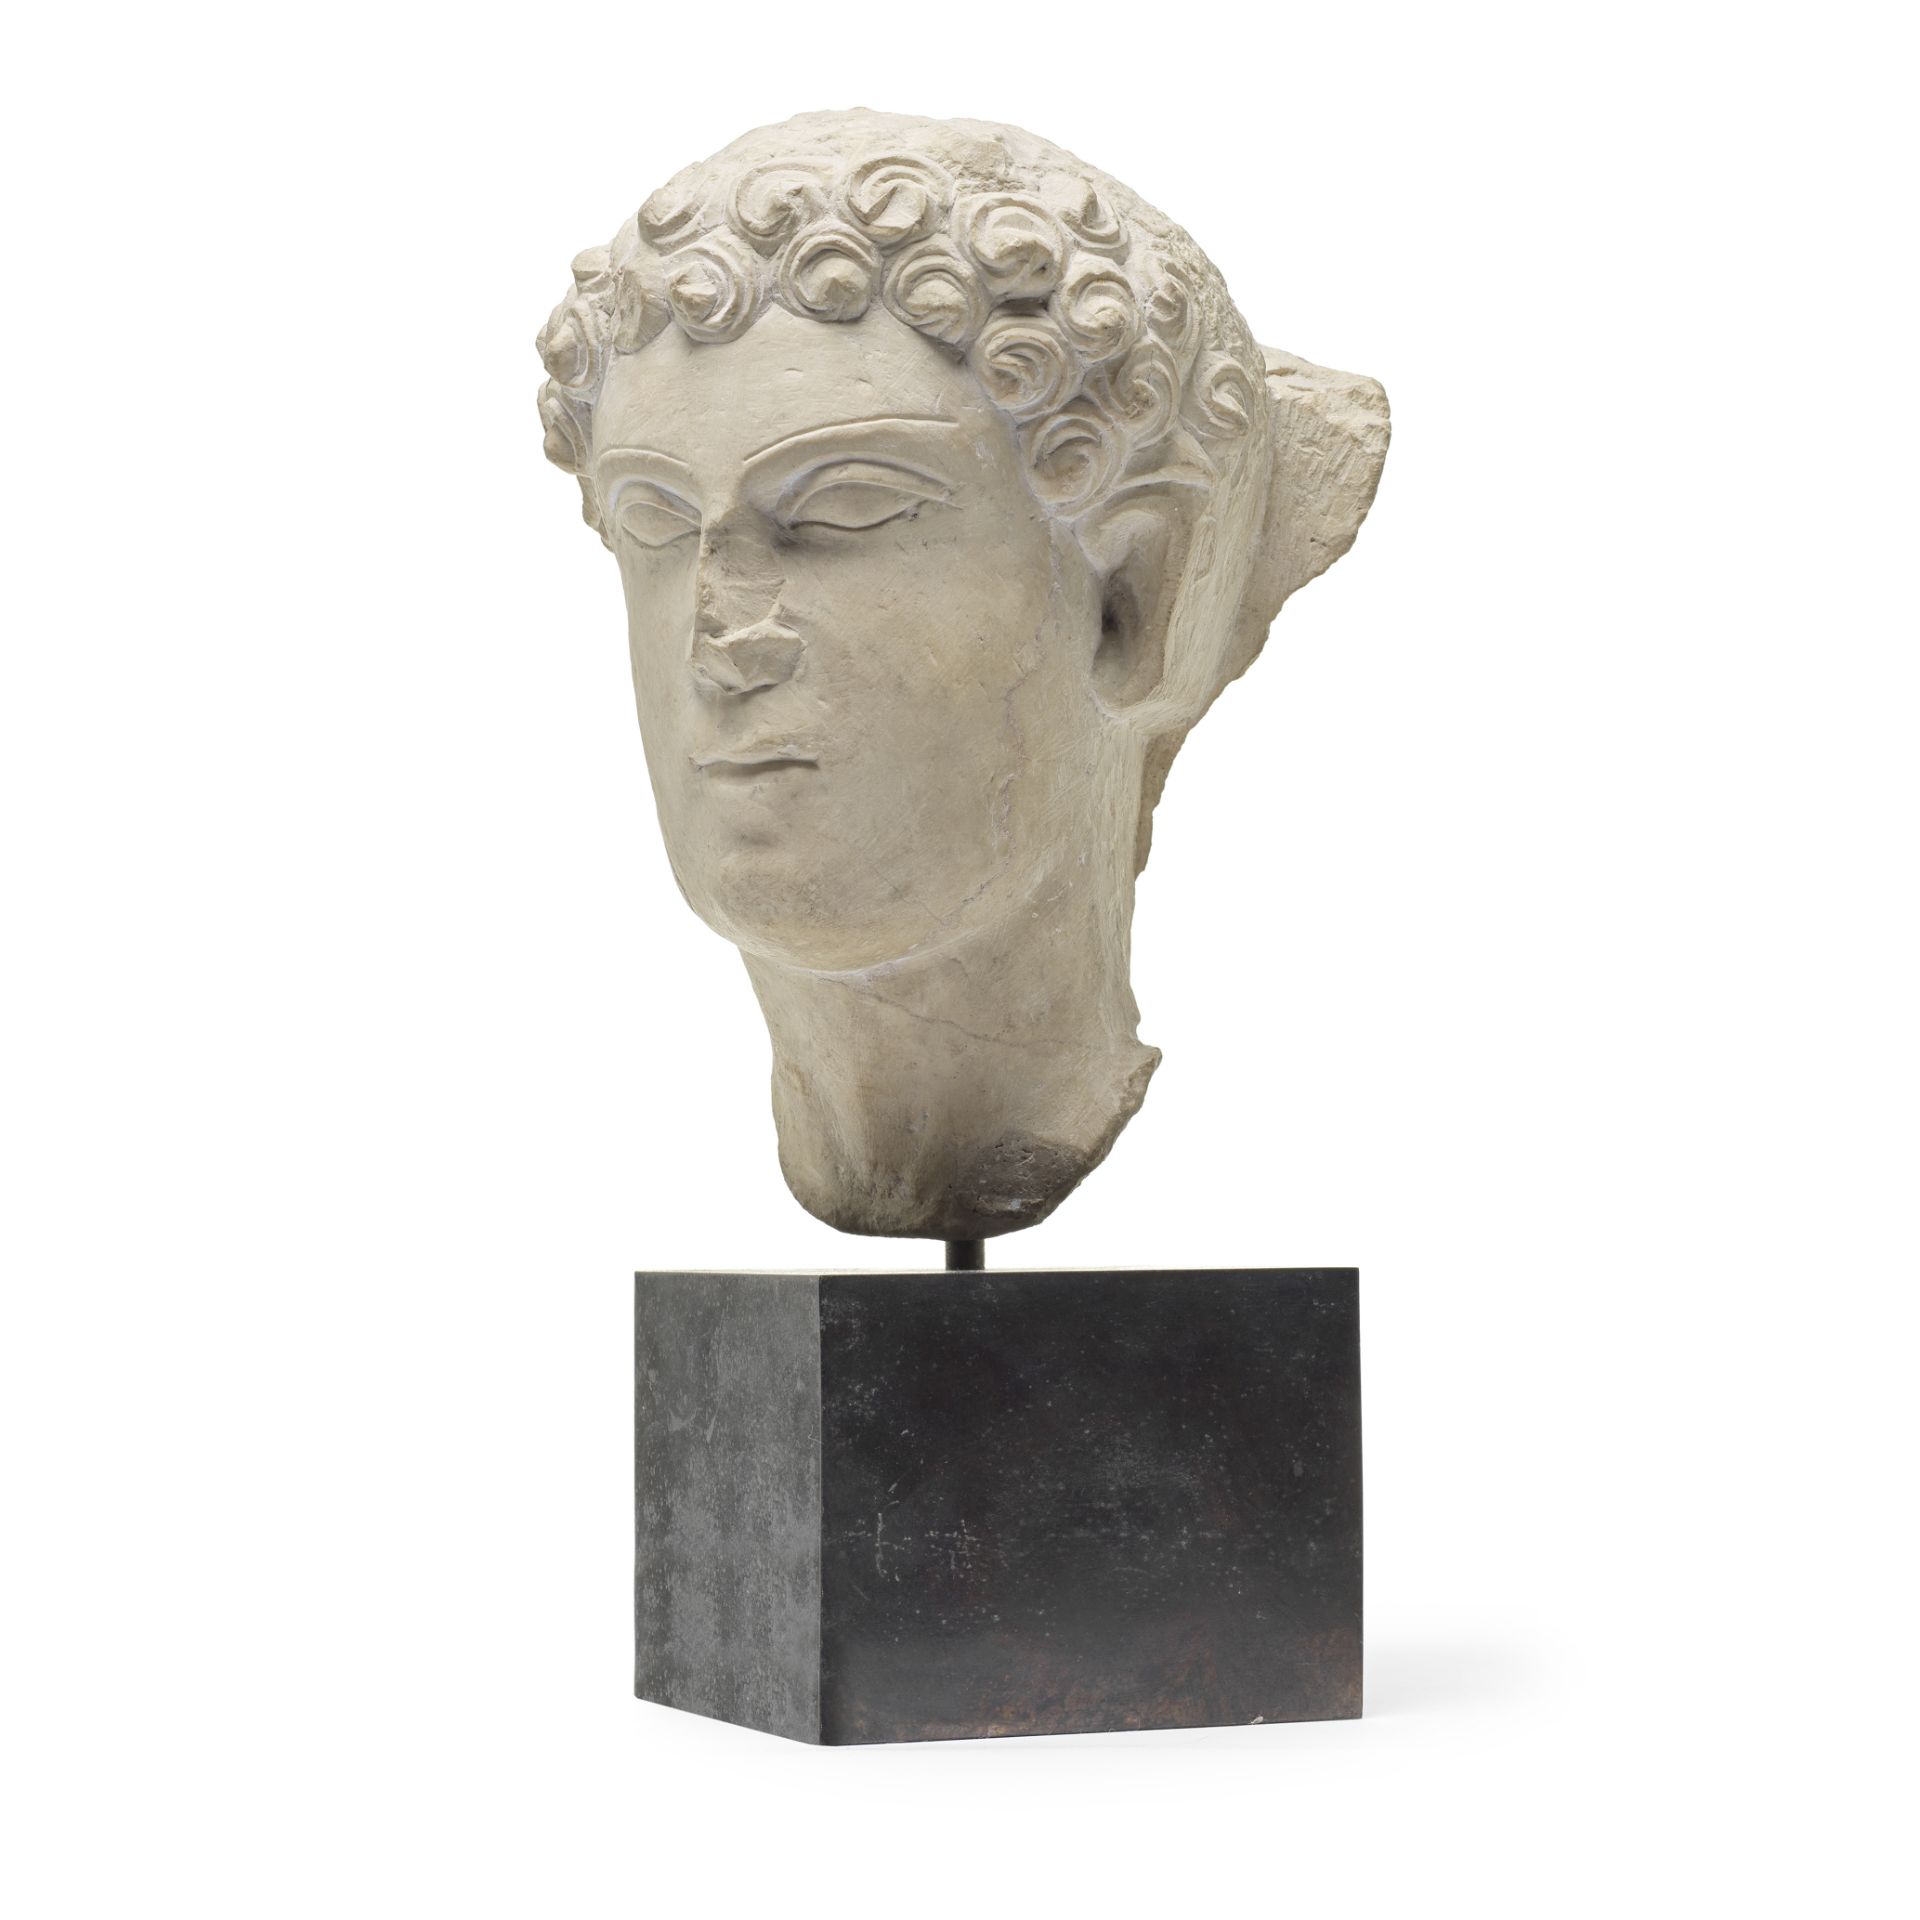 A carved marble bust fragment of a stylised male head in the antique style